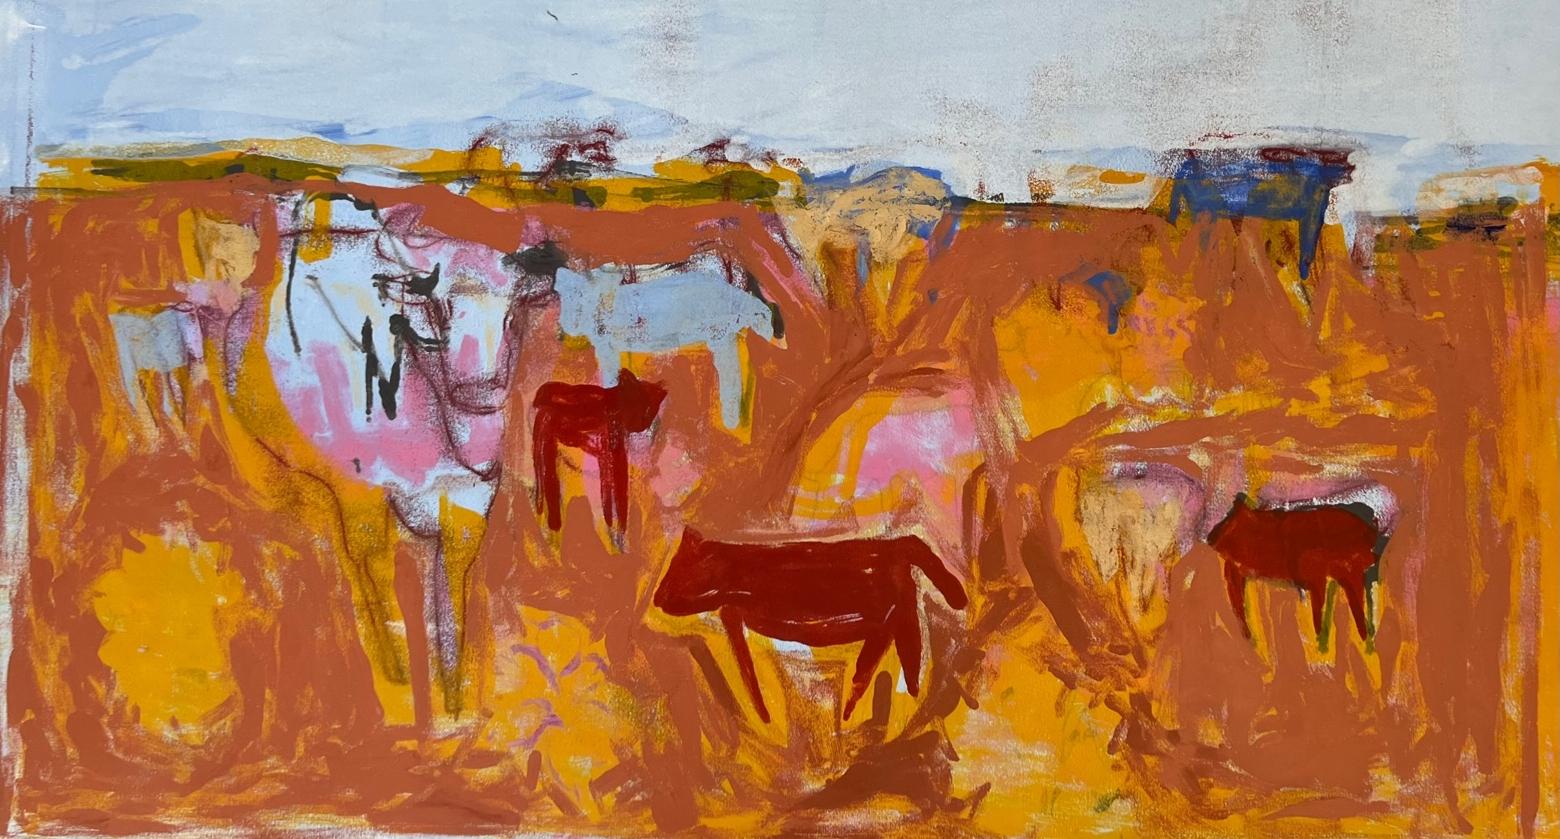 Cows is a 1 of 1 Monotype and displays bold and bright colors to highlight this abstract figurative work of art. This is a new series of monotypes by Charlotte Seifert that she began doing in 2023 It is 1/1 on paper in a custom frame which measures